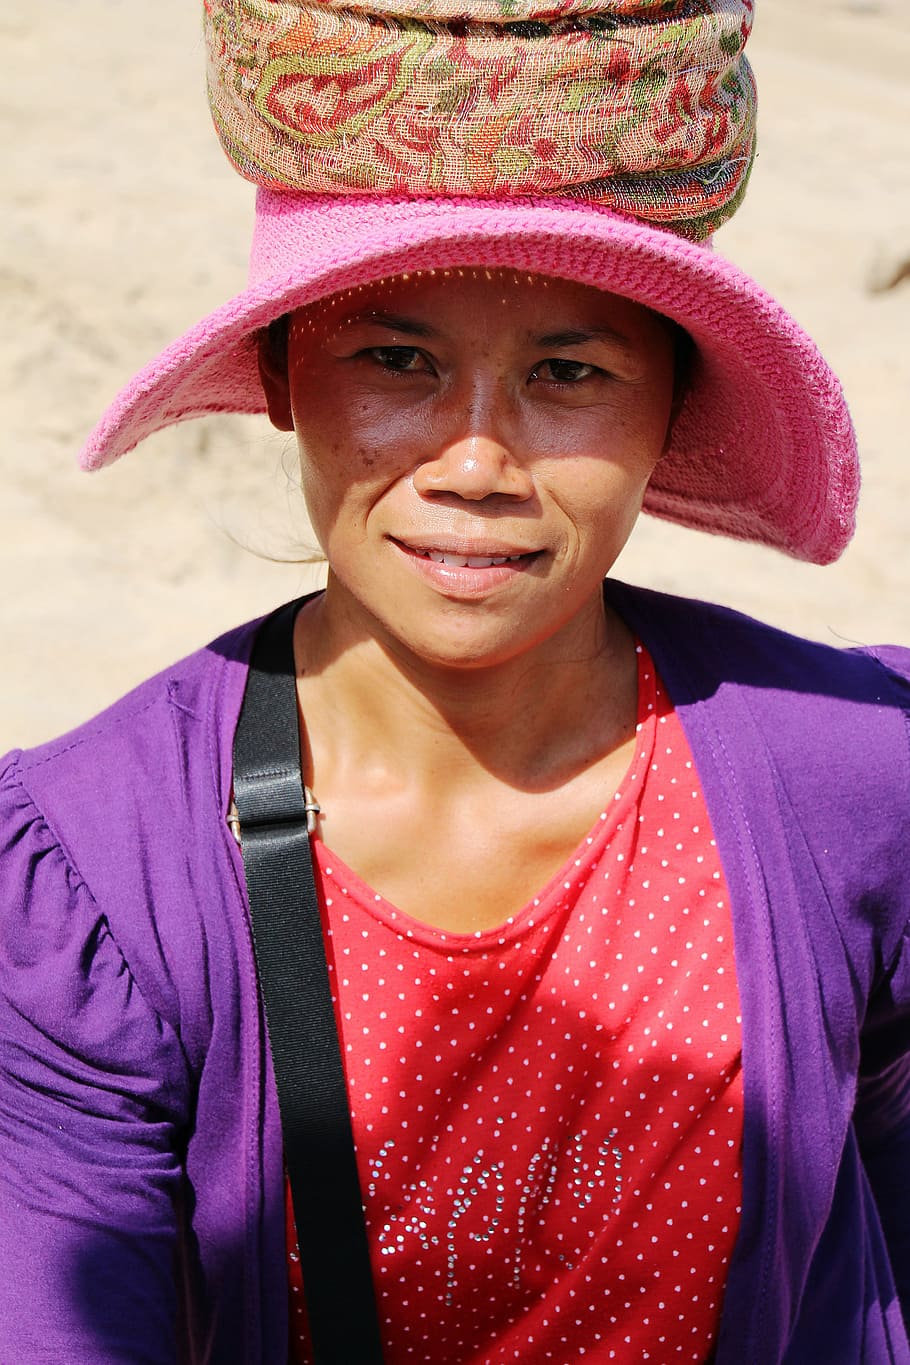 portrait, bali, woman, indonesian, face, characteristic, hat, clothing, one person, front view